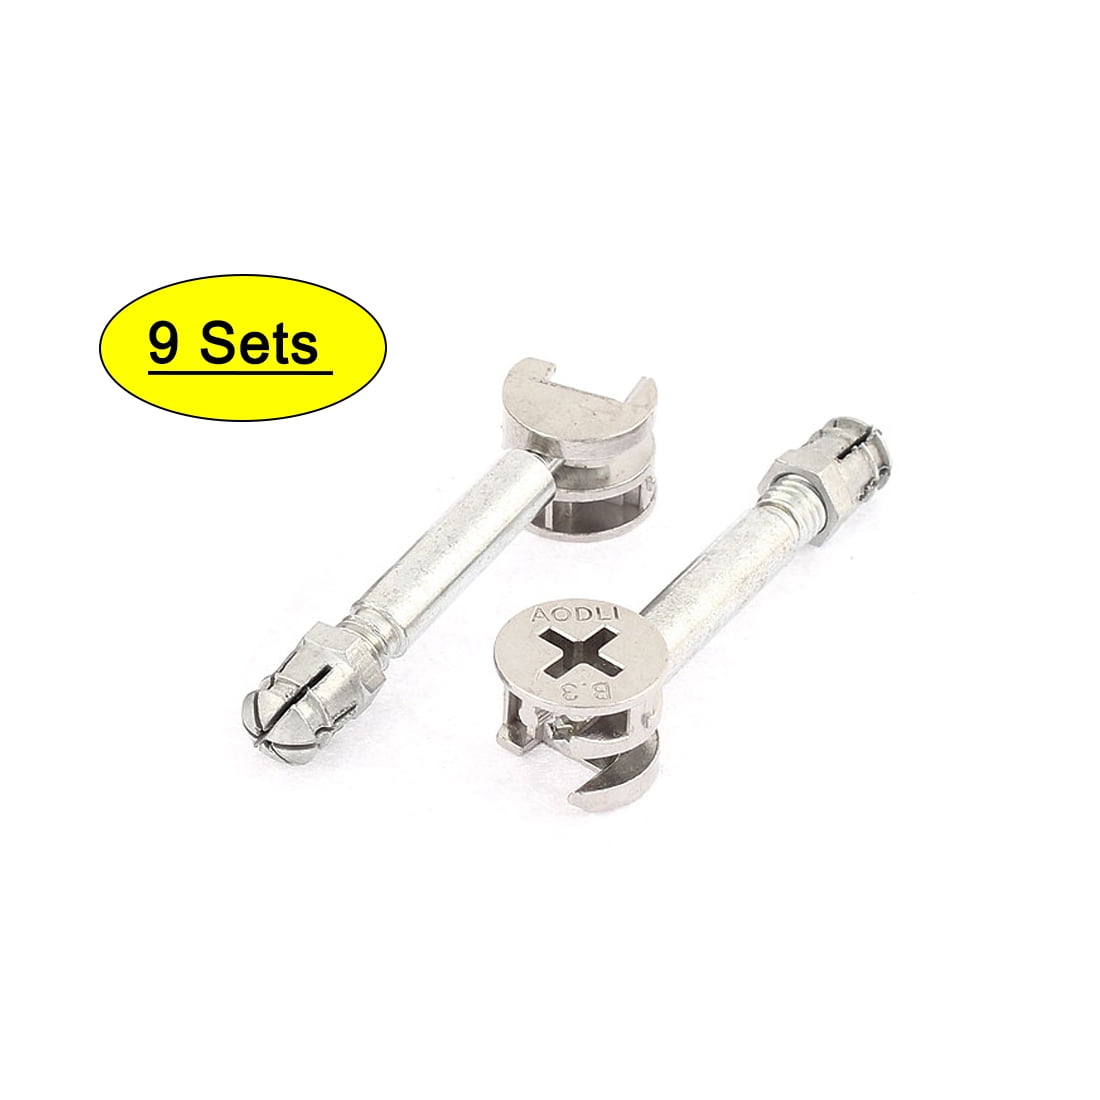 Uxcell a16071200ux0175 Furniture Cabinet Fixing Screw Locking Cam Bolt Pre-Inserted Nut Fitting 15mm Dia 20 Sets